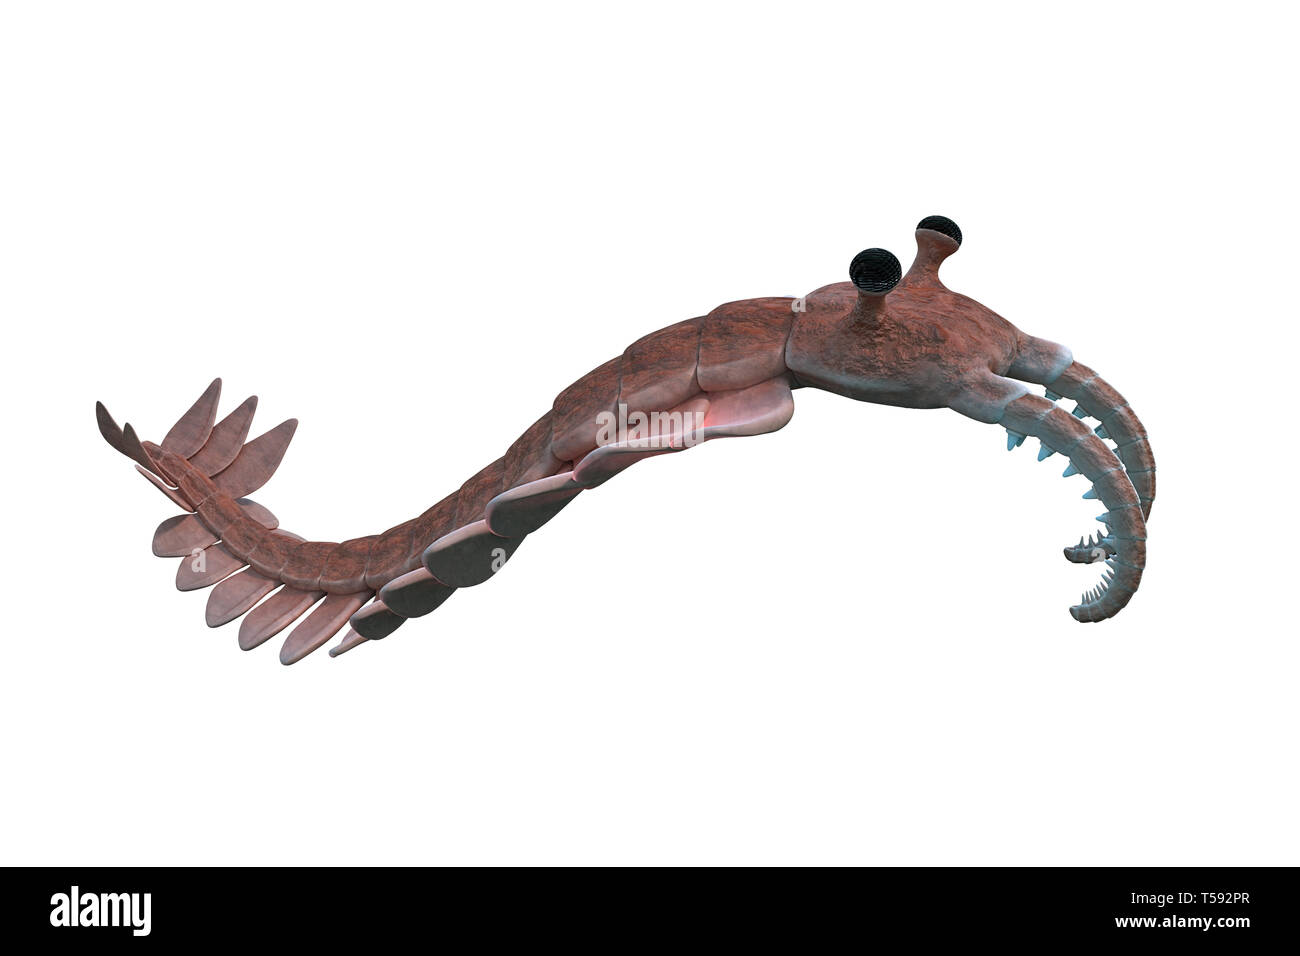 Anomalocaris, creature of the Cambrian period, isolated on white background Stock Photo